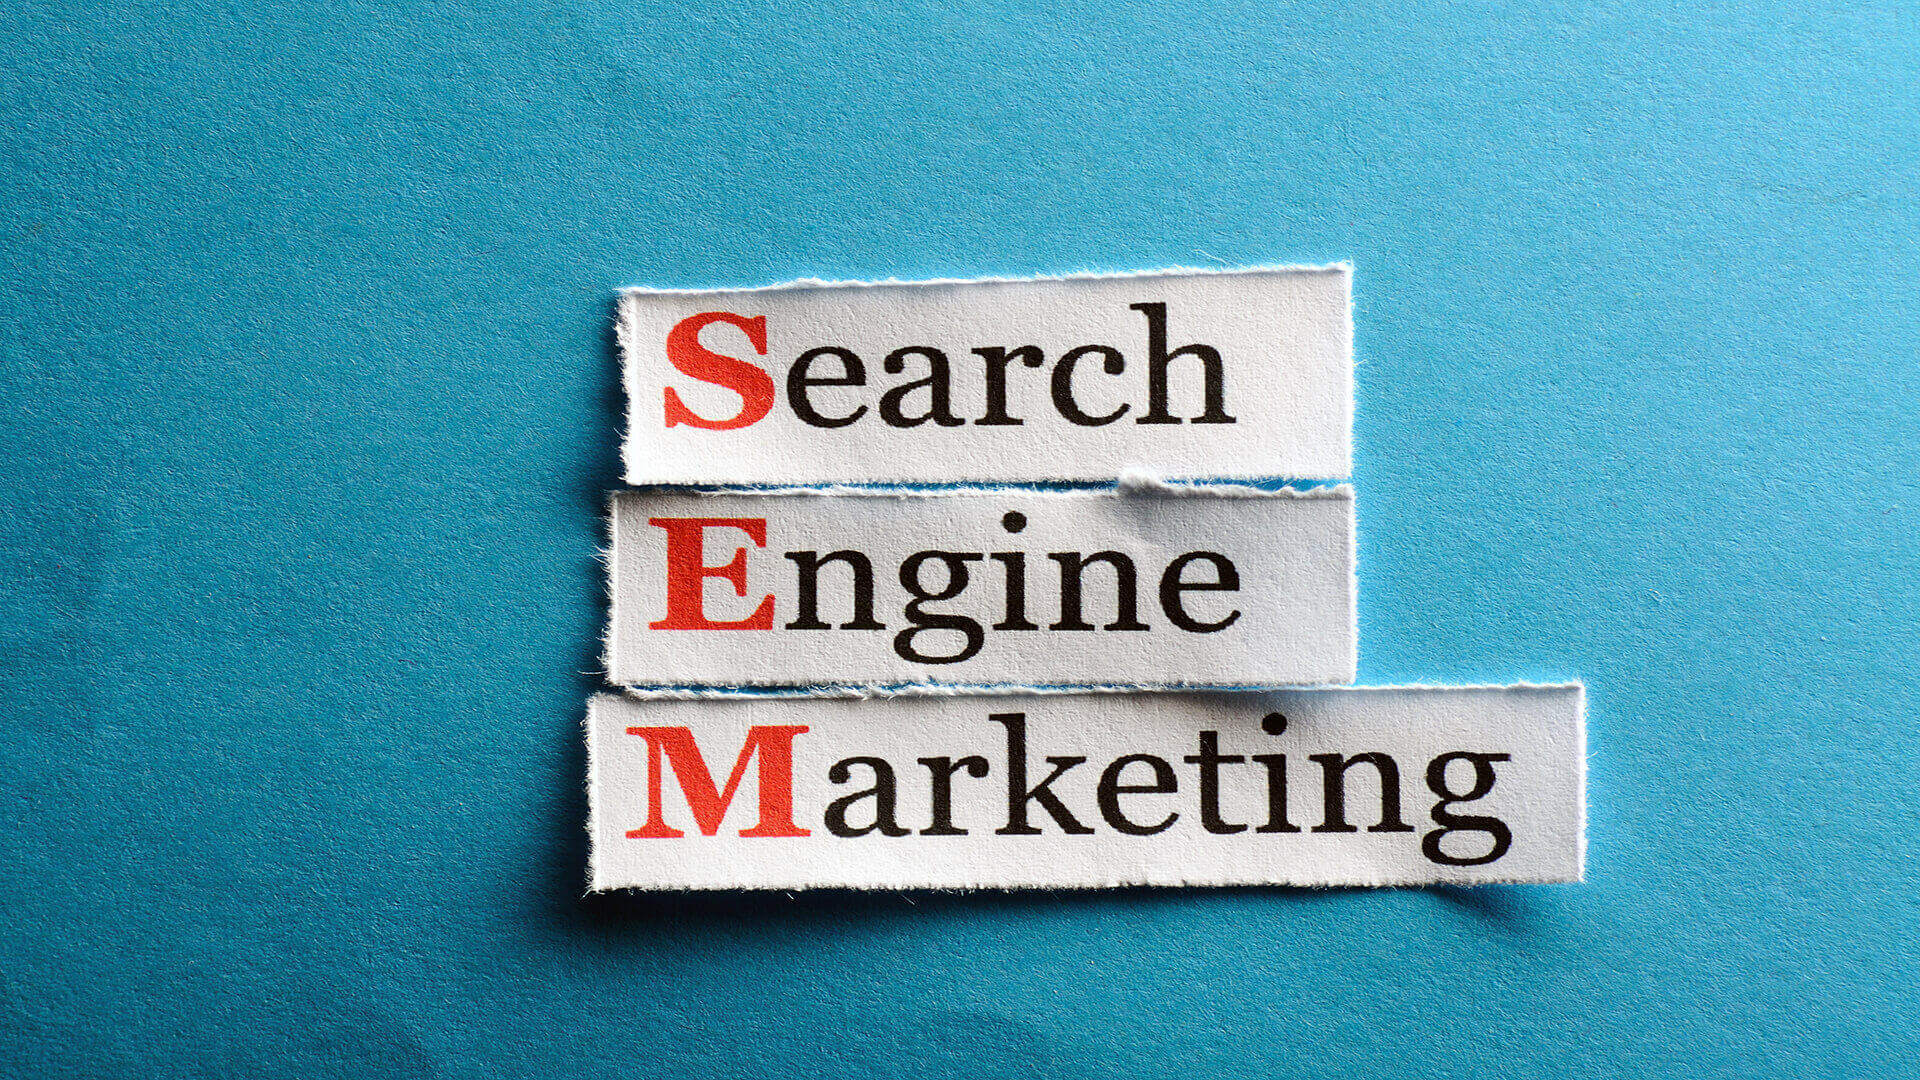 words search engine marketing on a blue piece of paper posing the question sem vs metasearch marketing